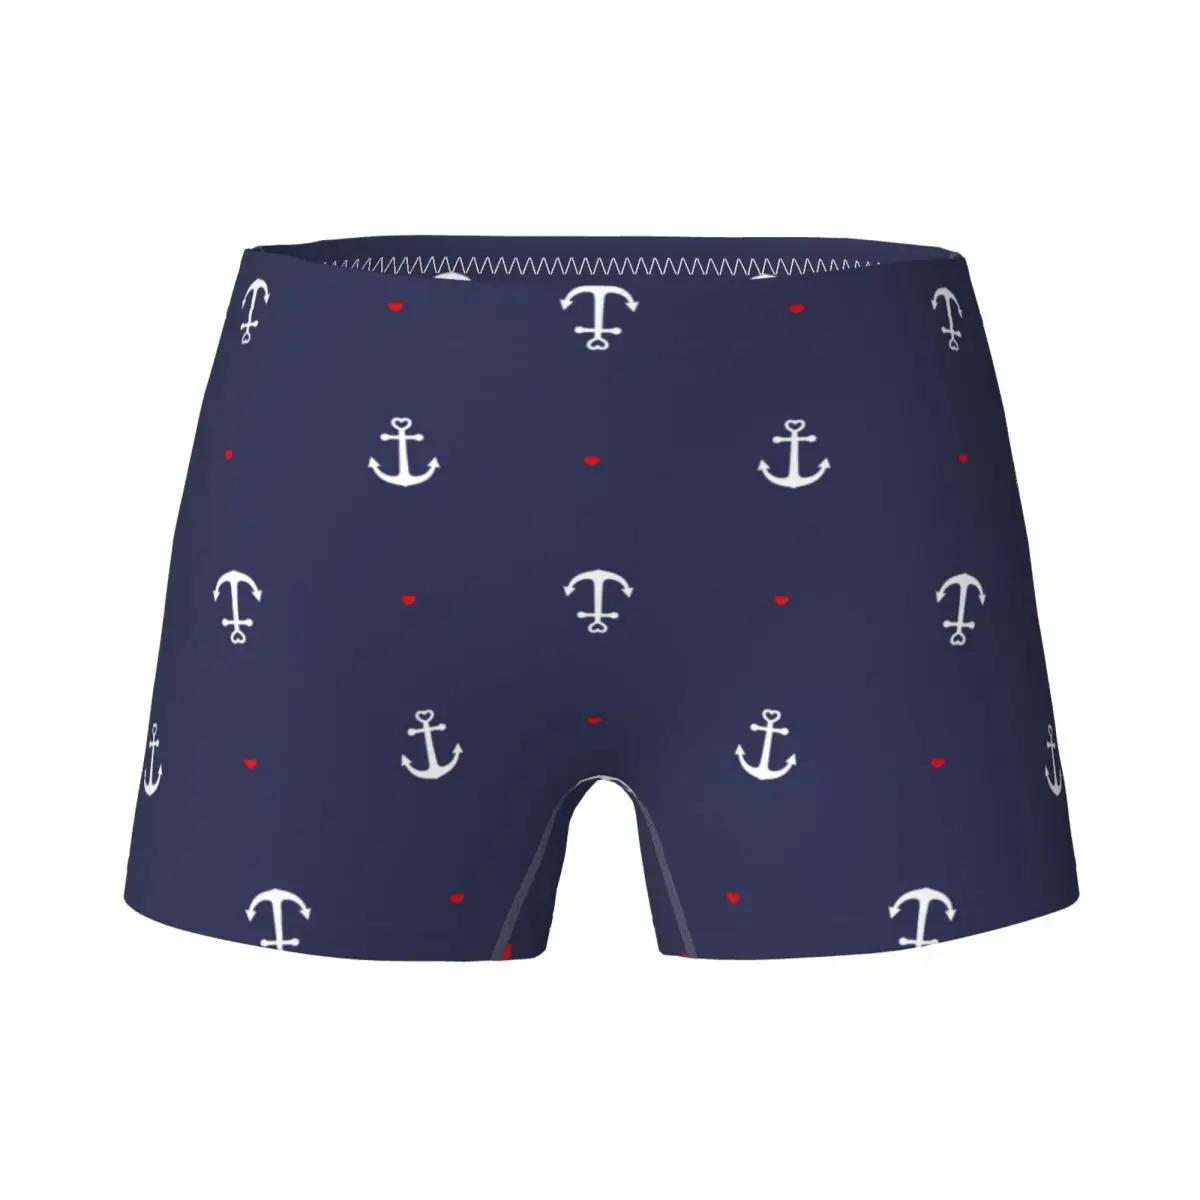 

Girl Anchor Navy Boxers Child Cotton Pretty Underwear Kids Teenagers Underpants Soft Shorts For 4-15Y